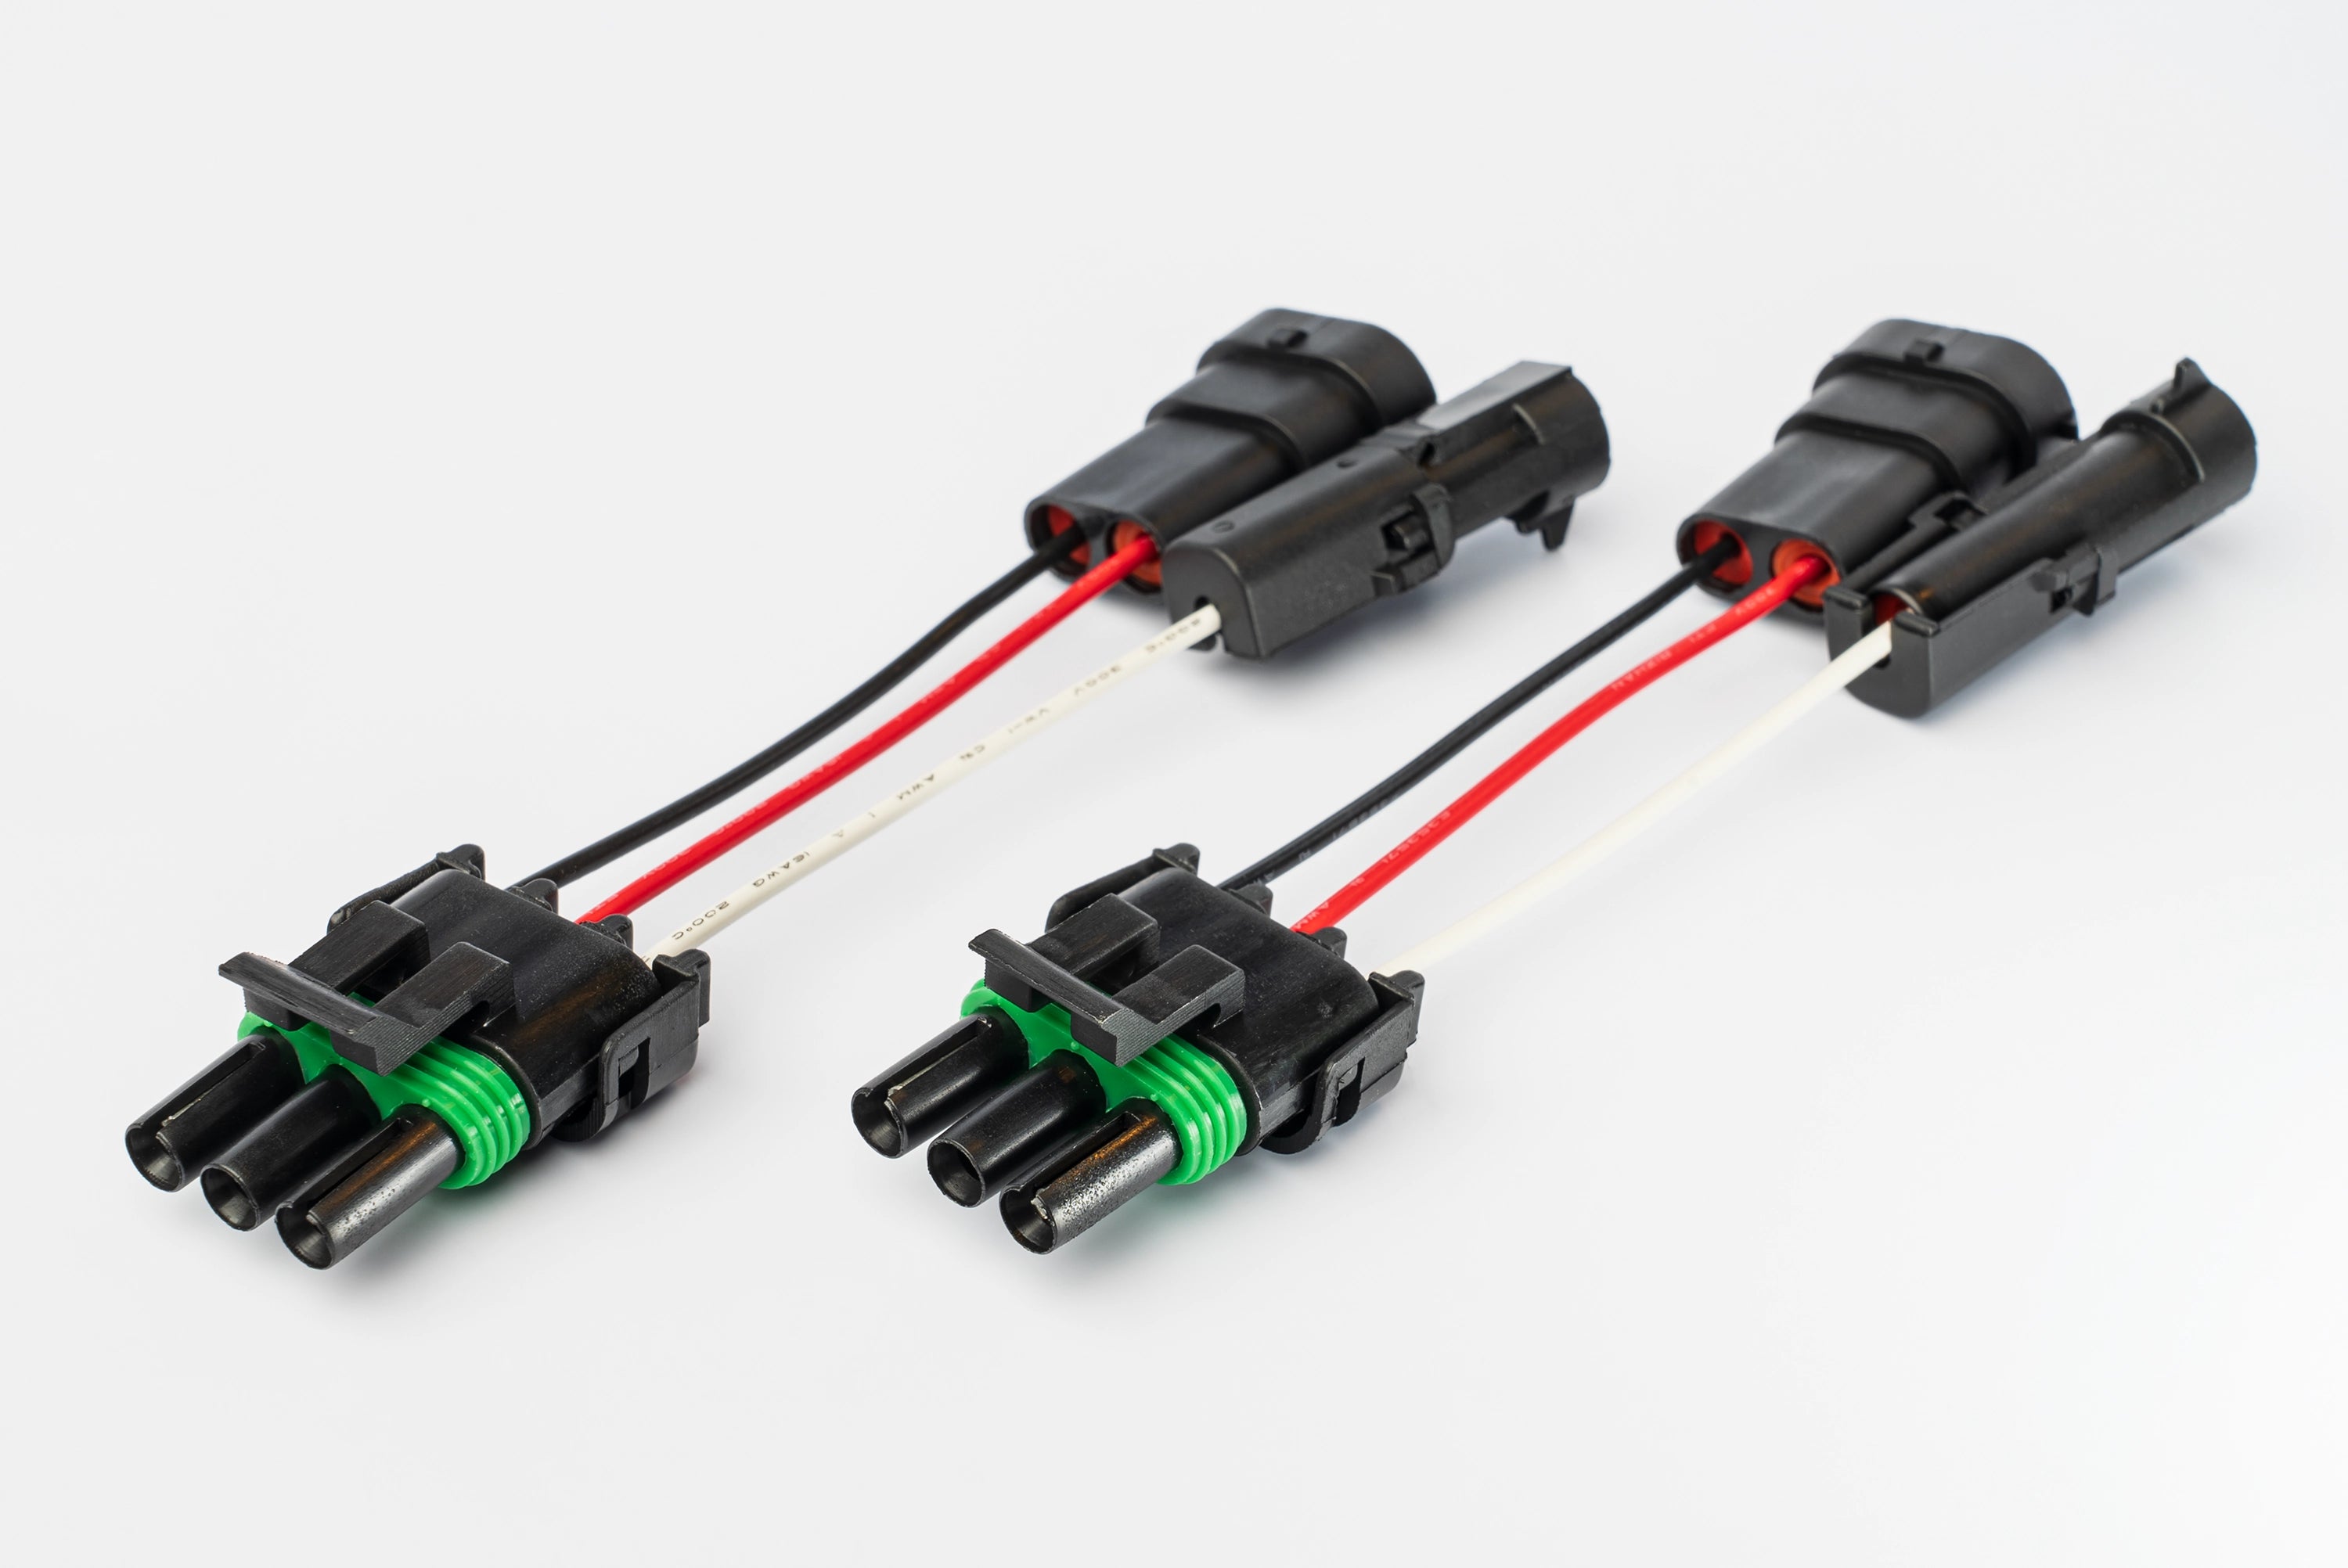 3 Pole WP Connector Adapters to H11 Factory Fog Connector with Backlight Port (Pair) (Bronco & Others)